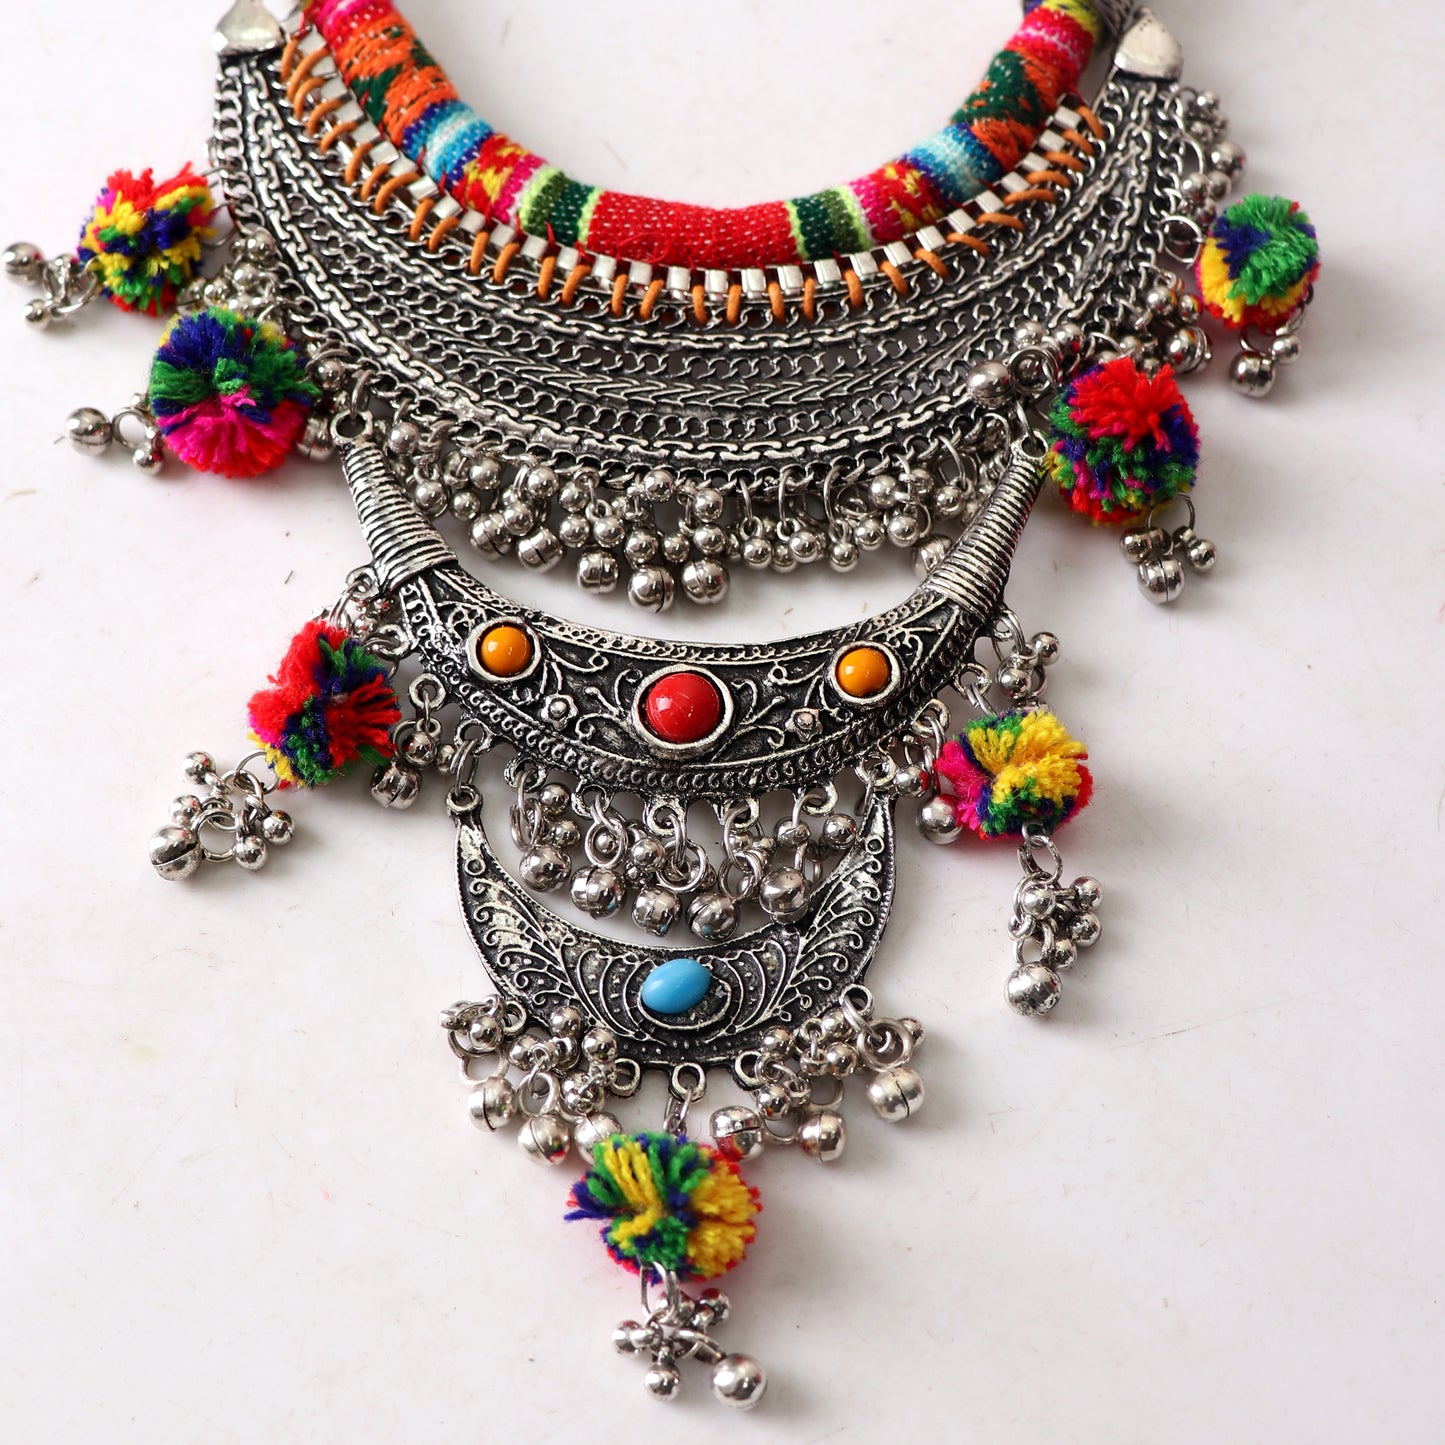 Necklace,Boho Statement Necklace - Cippele Multi Store